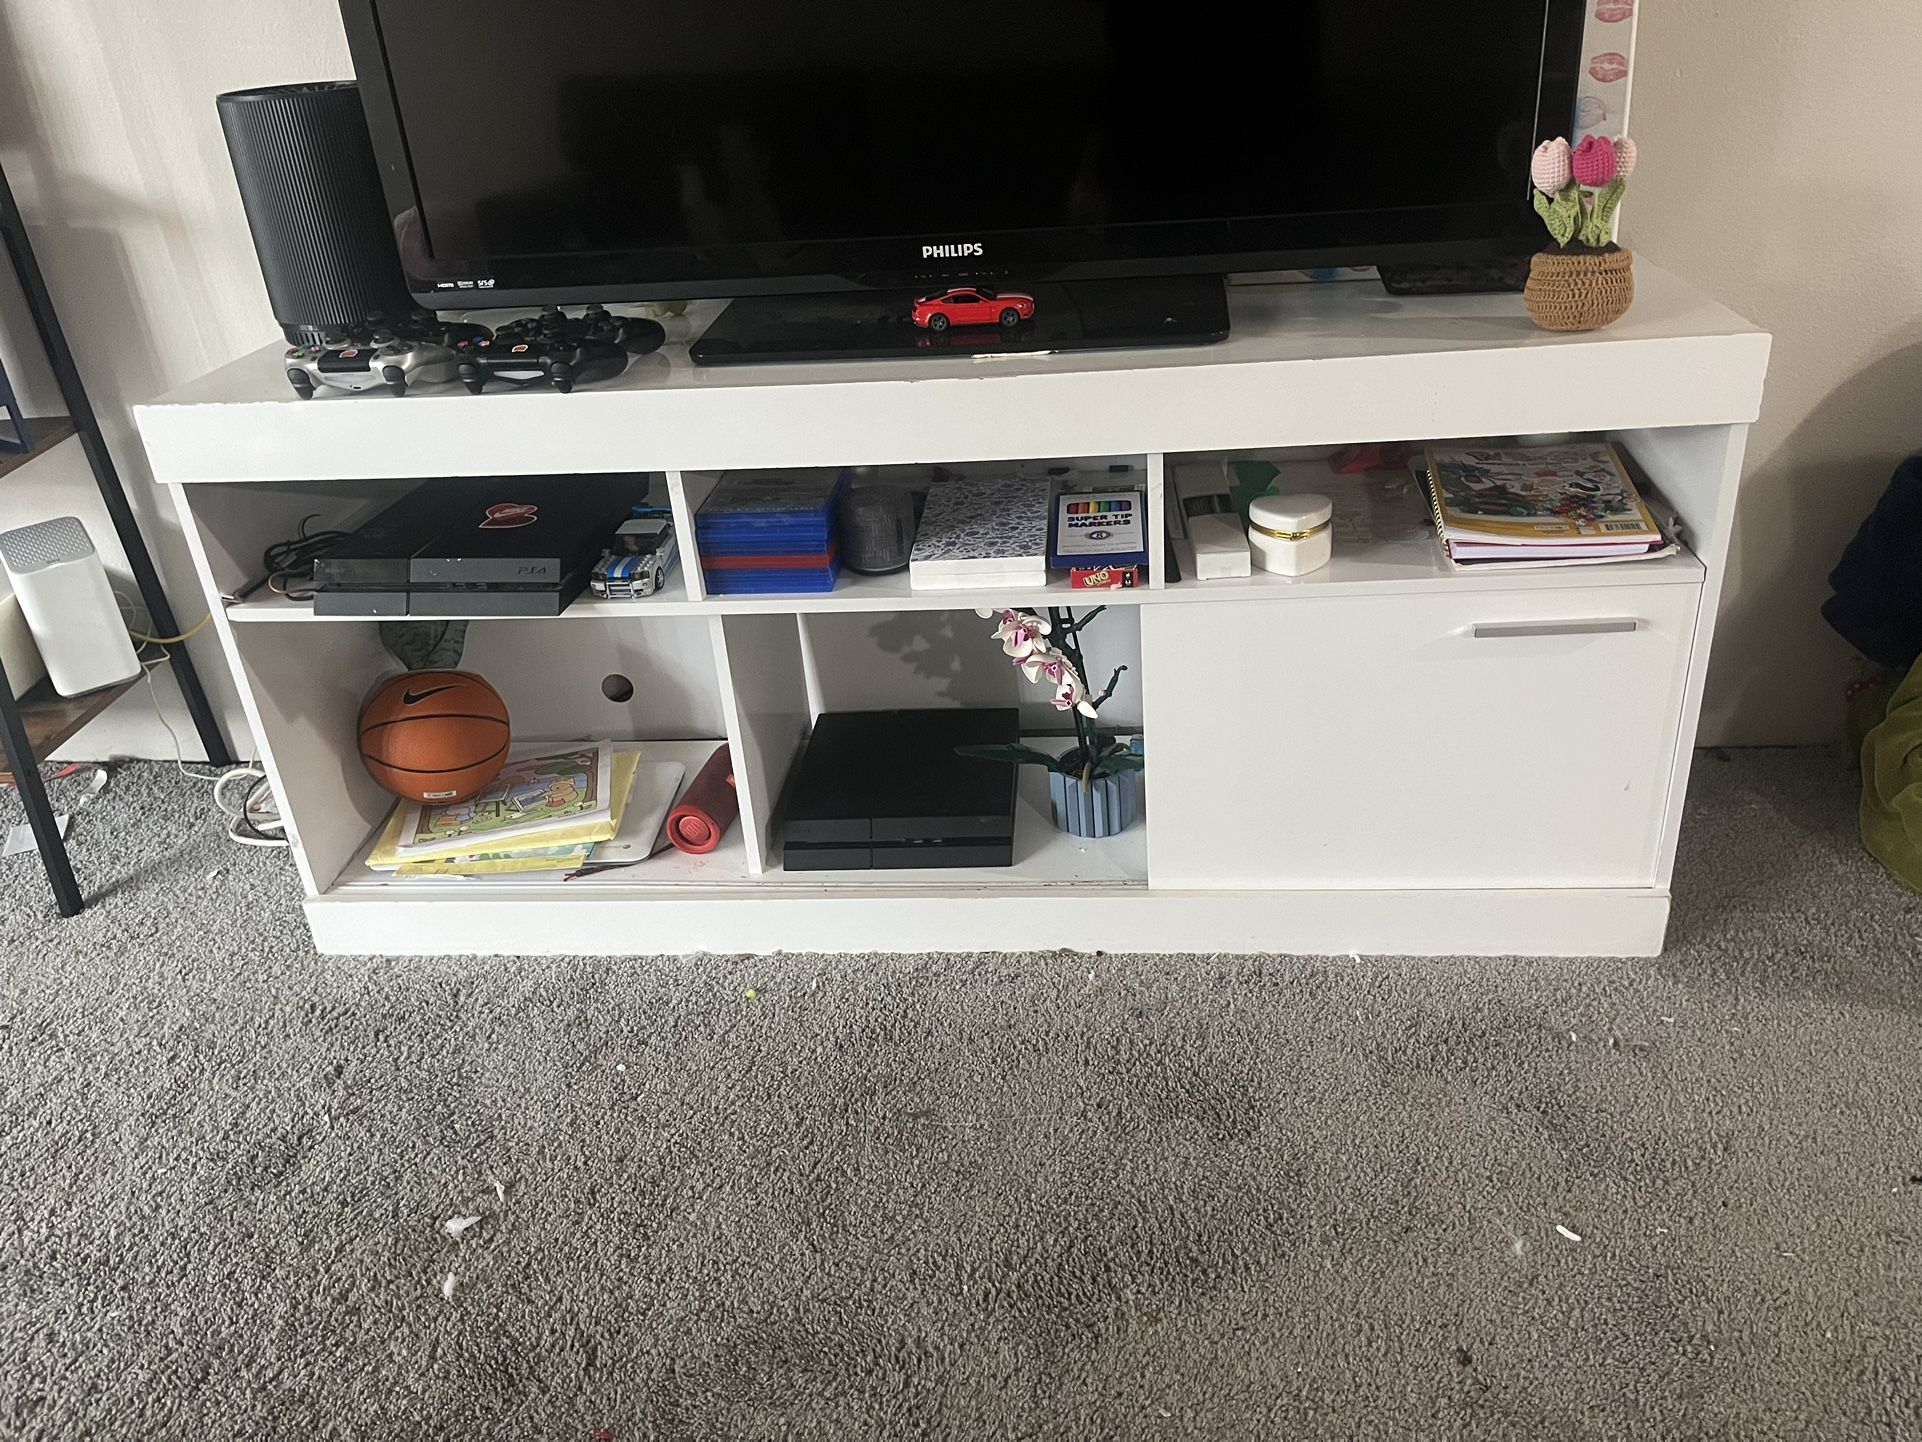 Tv Stand Only 